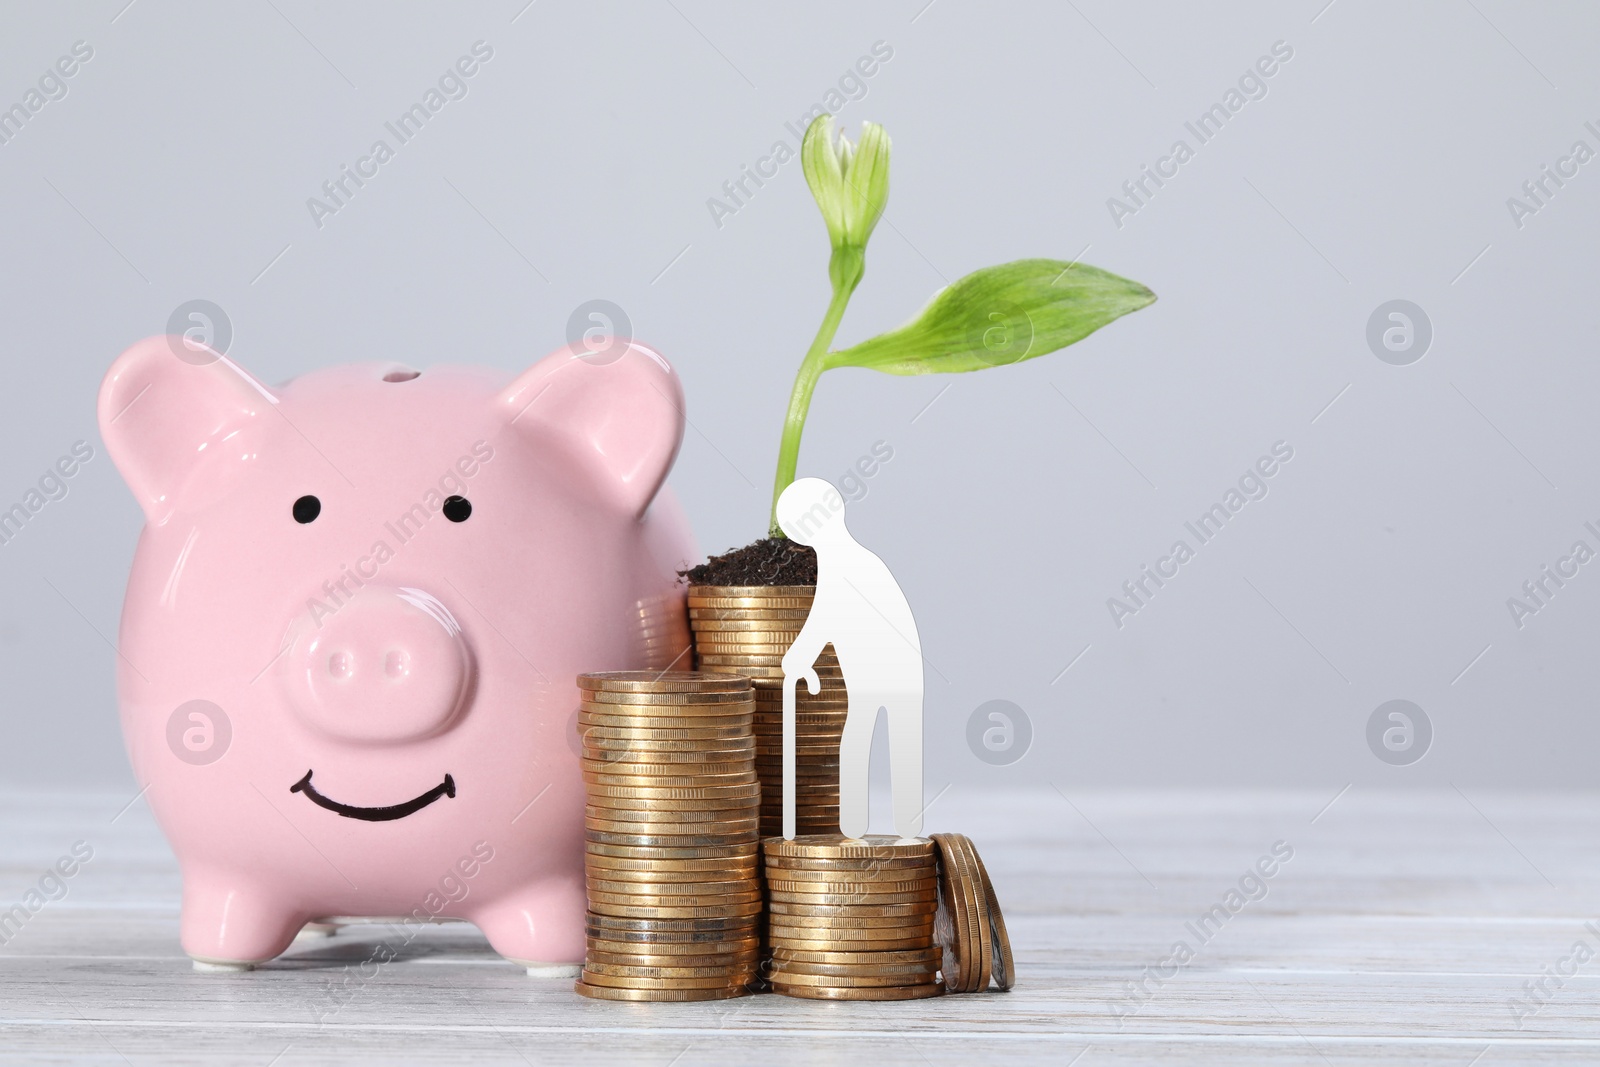 Image of Pension concept. Elderly man illustration, piggybank, coins and sprout on white wooden table. Space for text